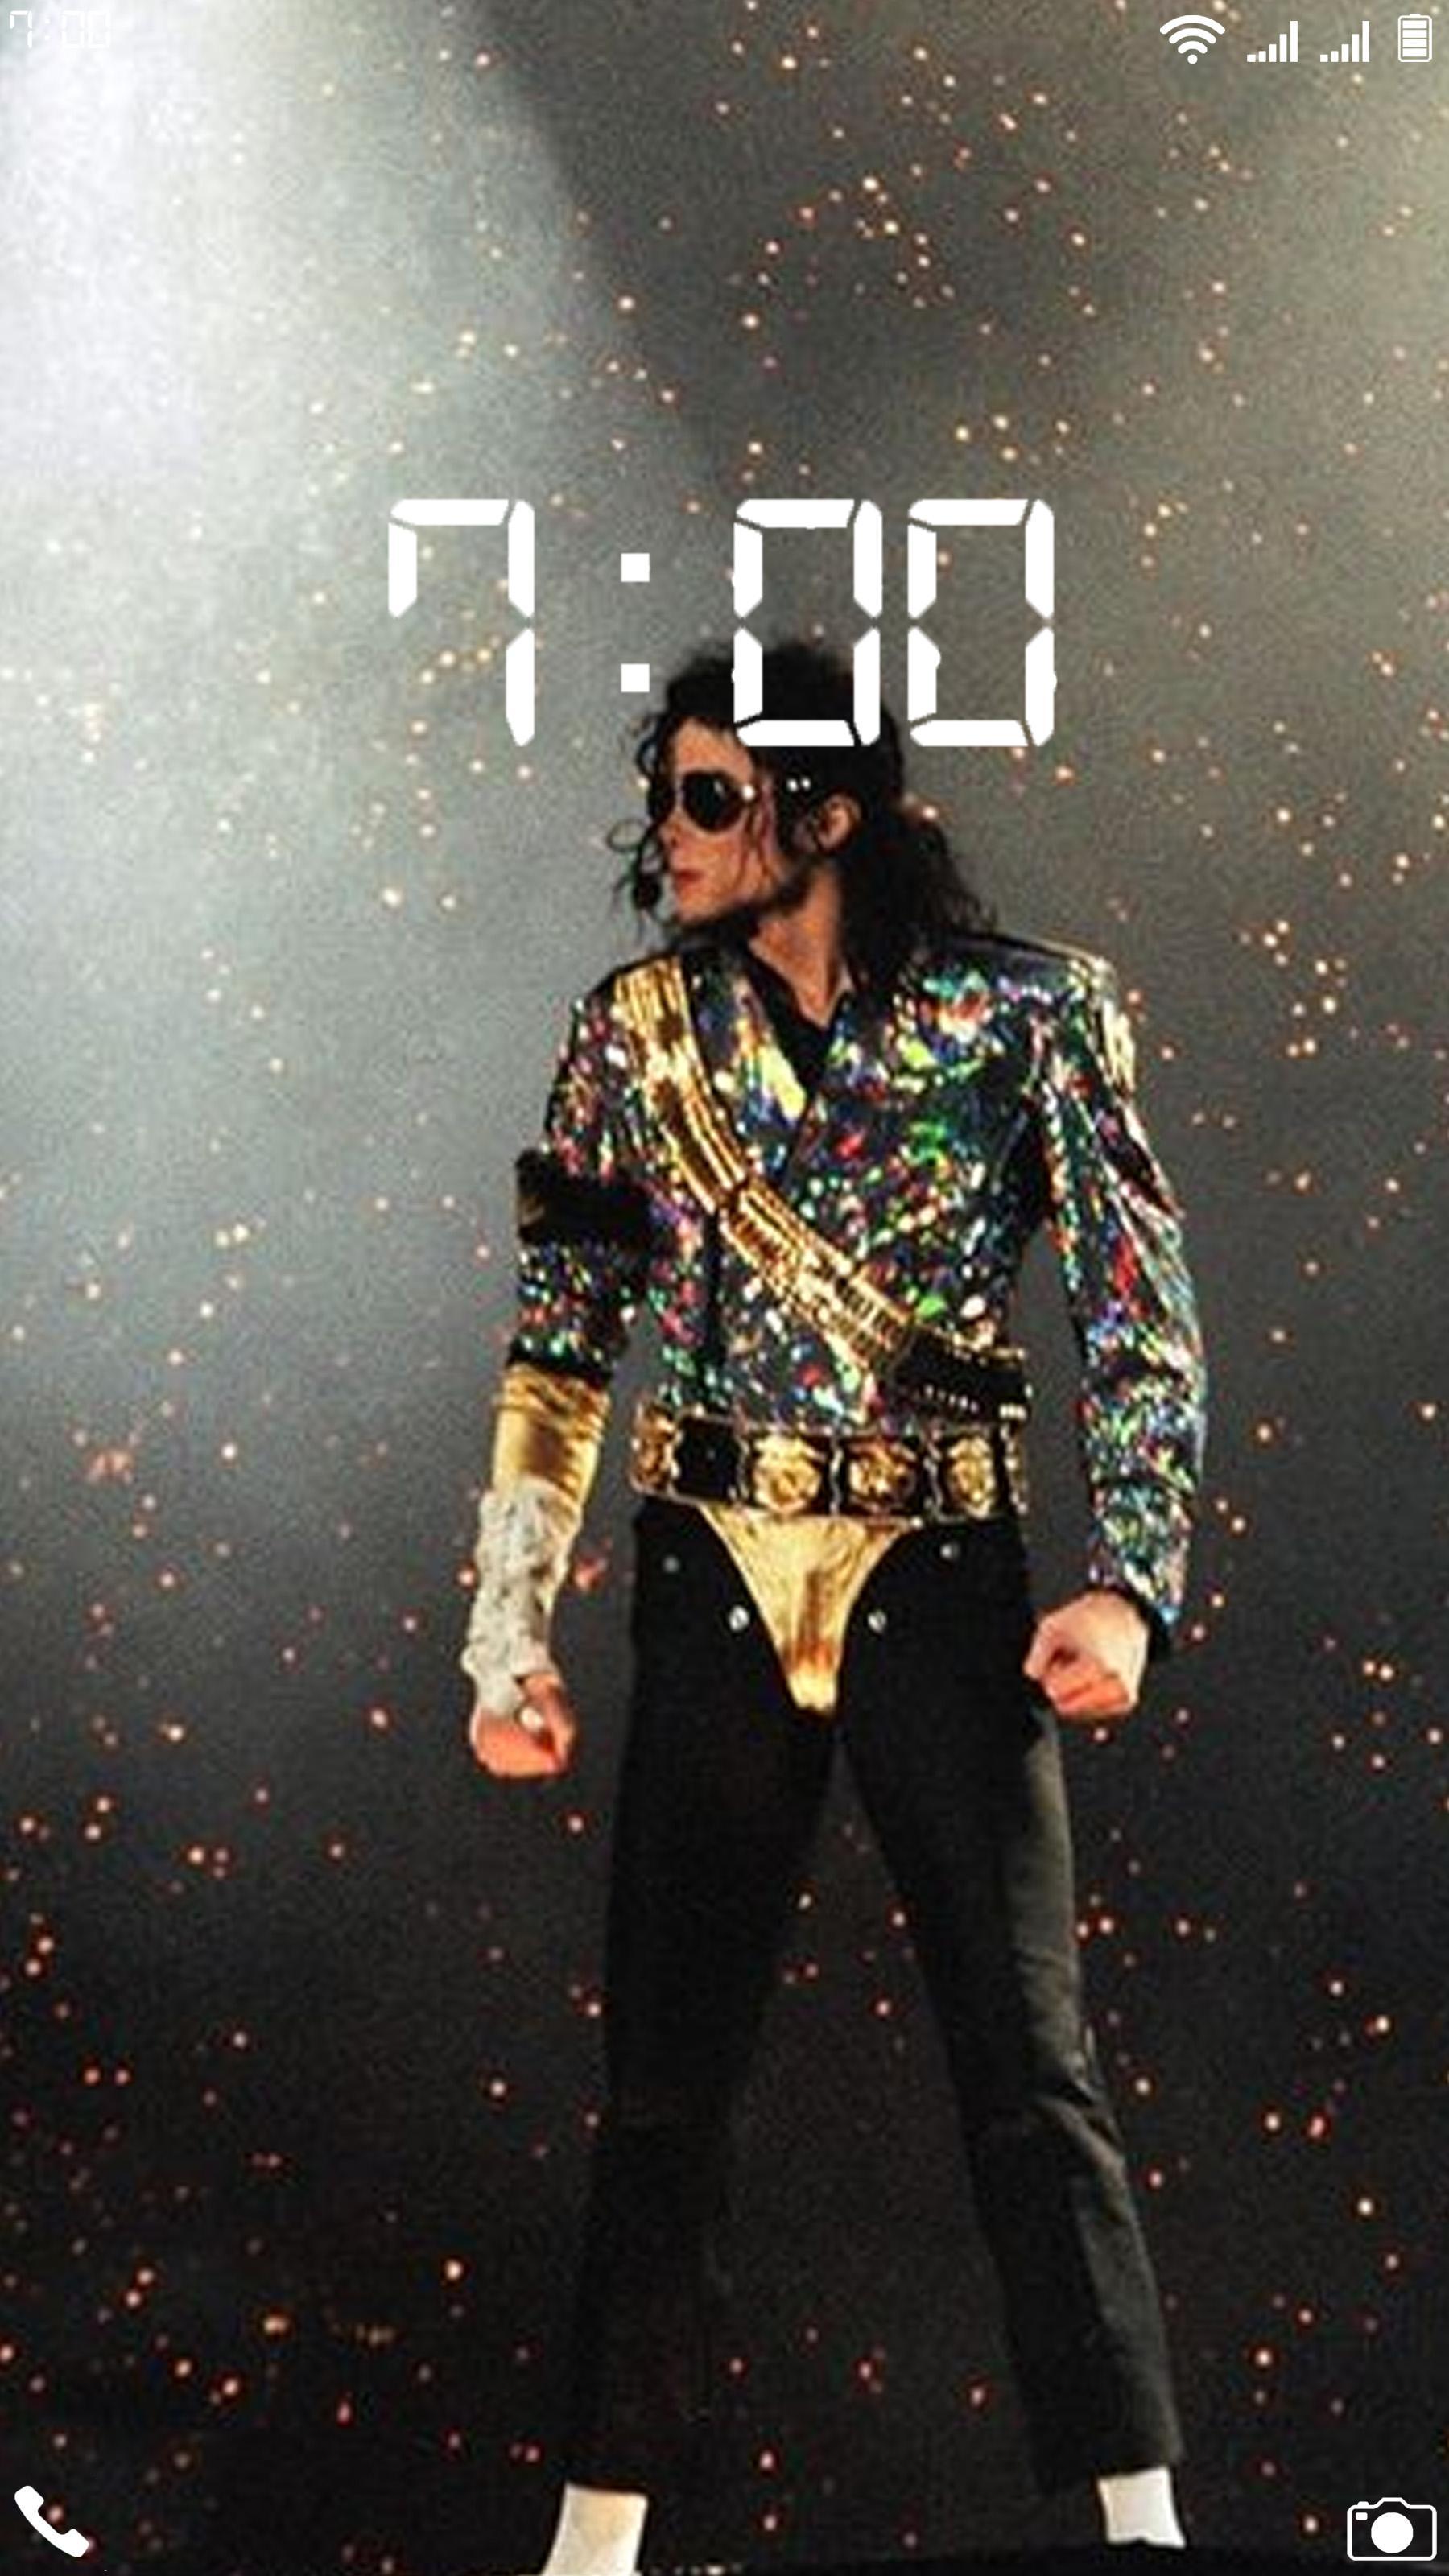 New Michael Jackson Wallpapers Hd For Android Apk Download